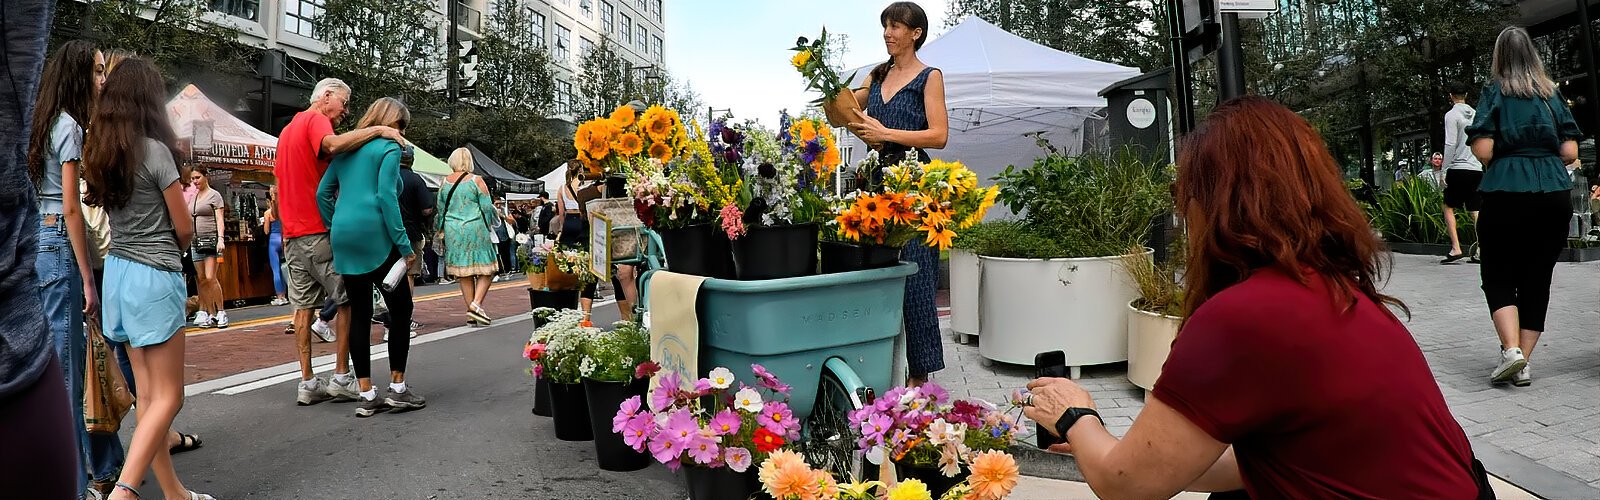 During The Market at Water Street Tampa, Swiss-born Kali Rabaut prepares cheerful bouquets with flowers that come from farmers as well as her own garden.